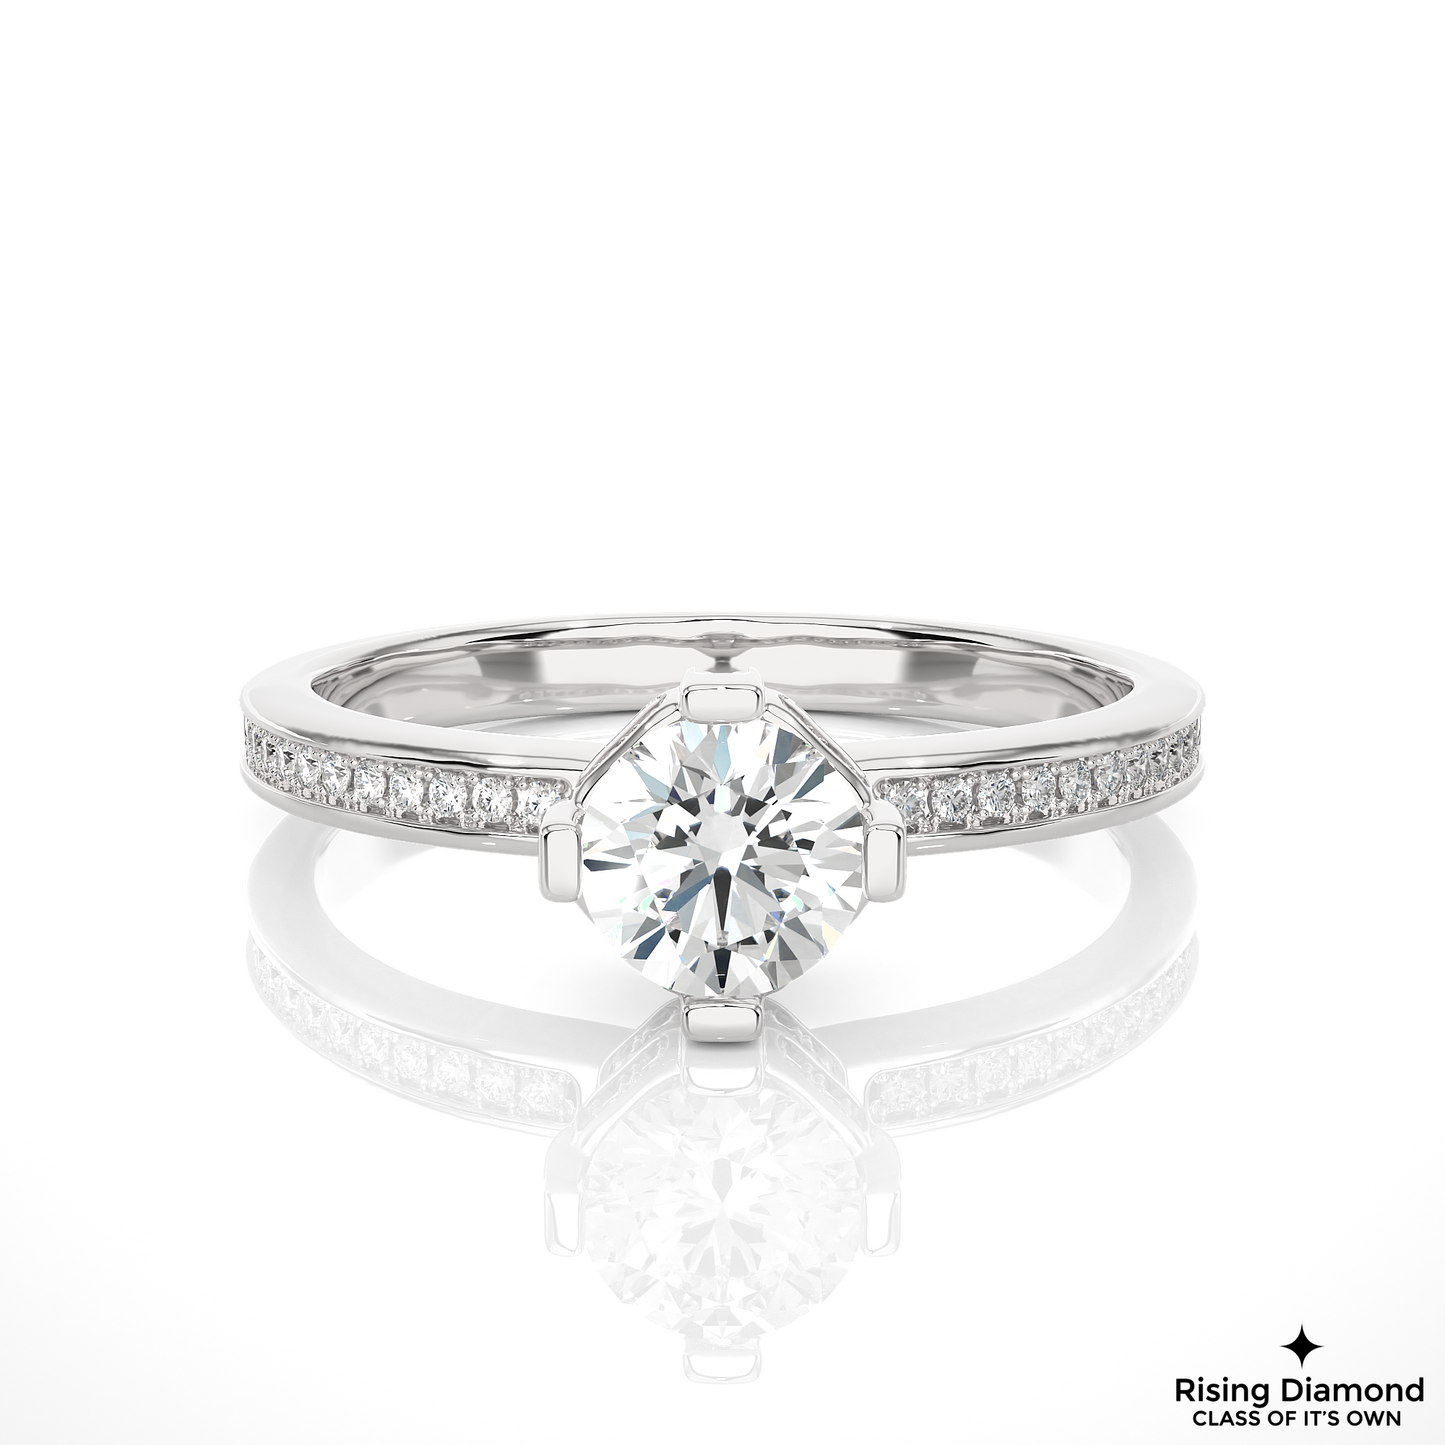 0.75 CT Round Cut Lab Diamond Engagement Ring in Hidden Halo Setting With Pave Shank